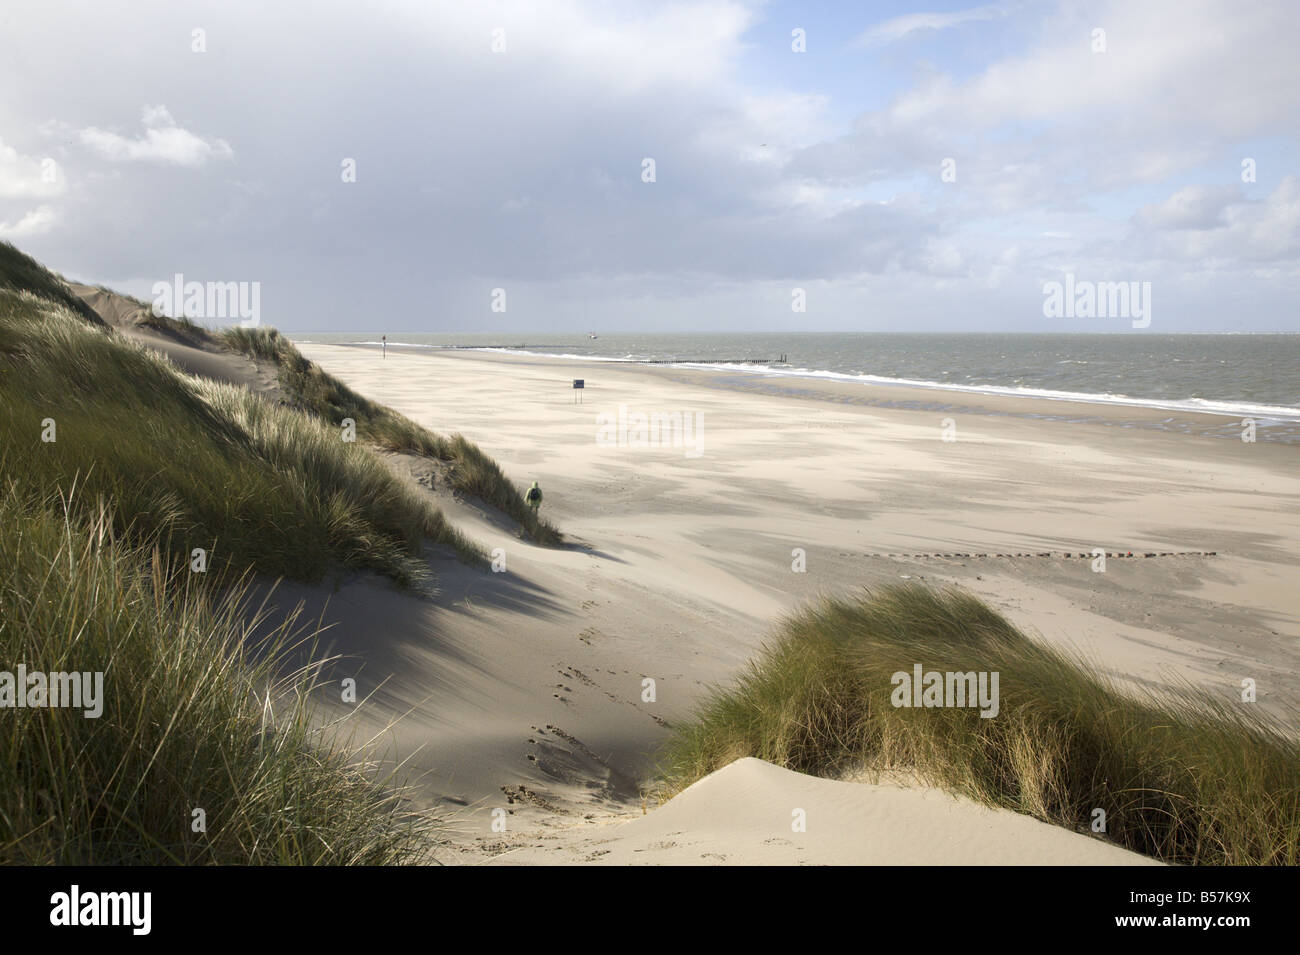 Beach and outer dunes, Haamstede, Zealand, Netherlands Stock Photo